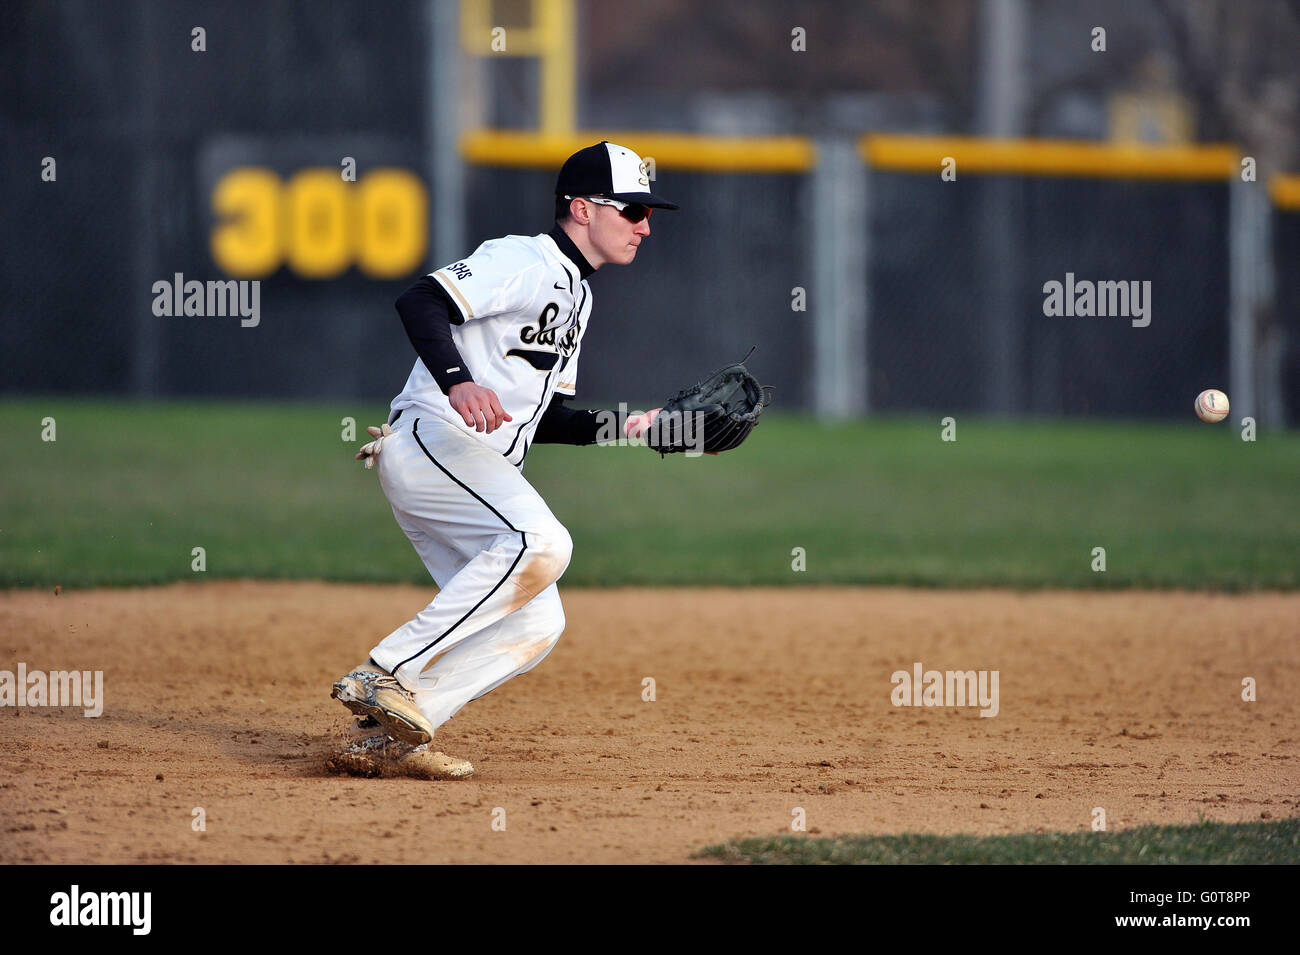 Second baseman lining up a ground ball behind second base during a high school baseball game. USA, Stock Photo